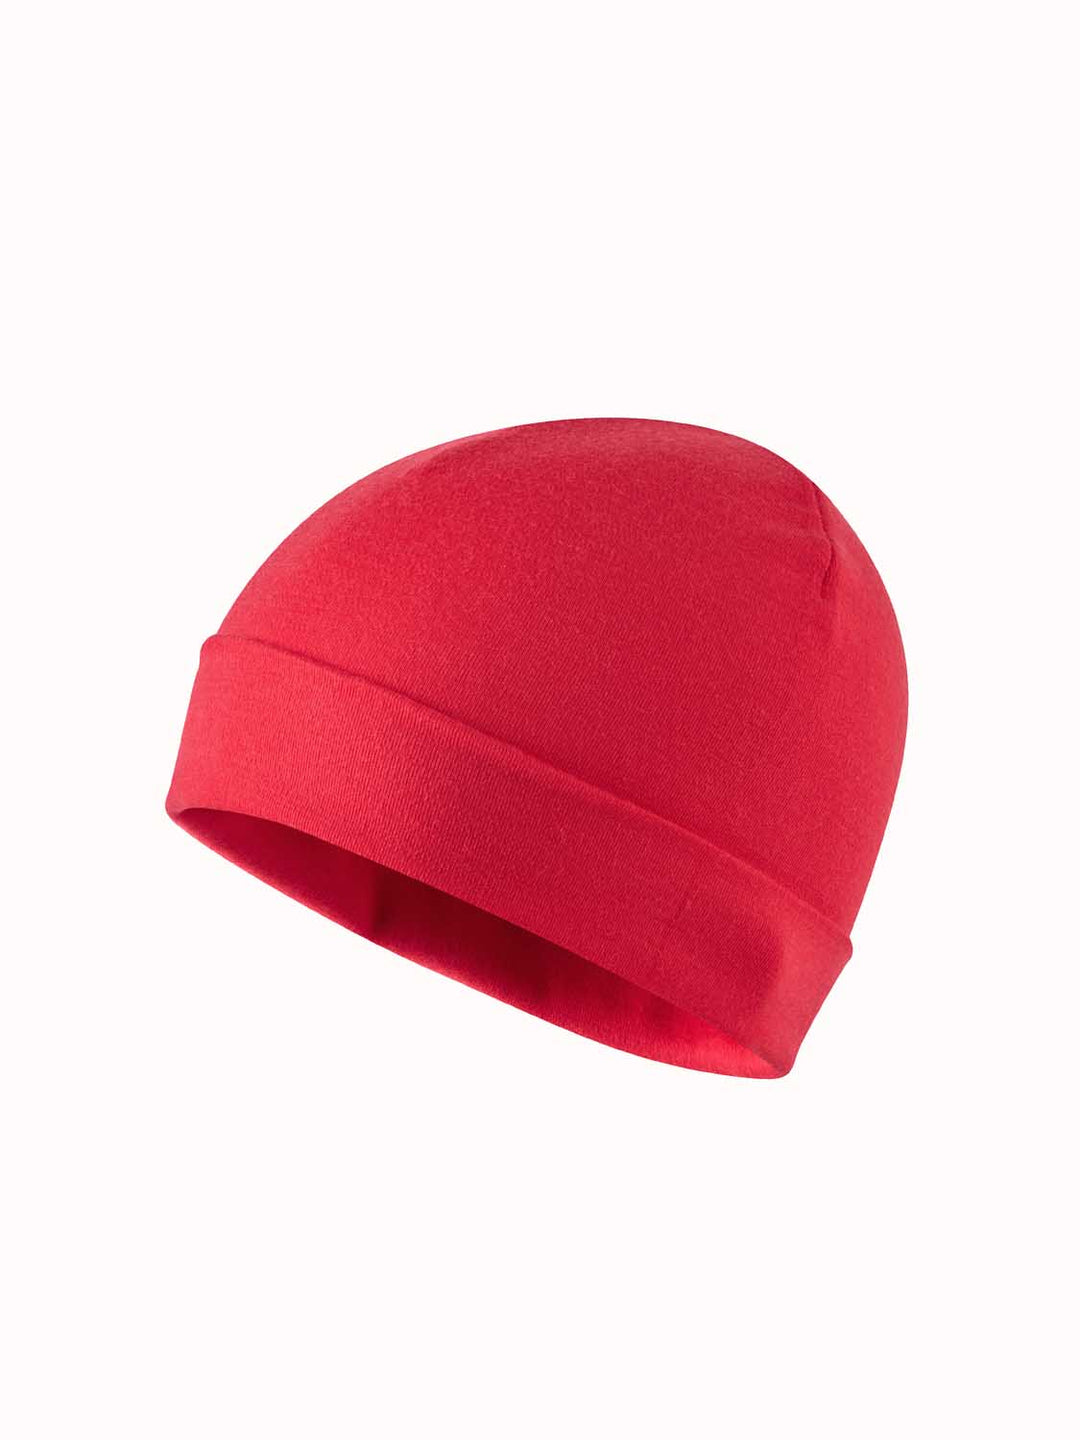 Merino beanie hat red #colour_soft-red